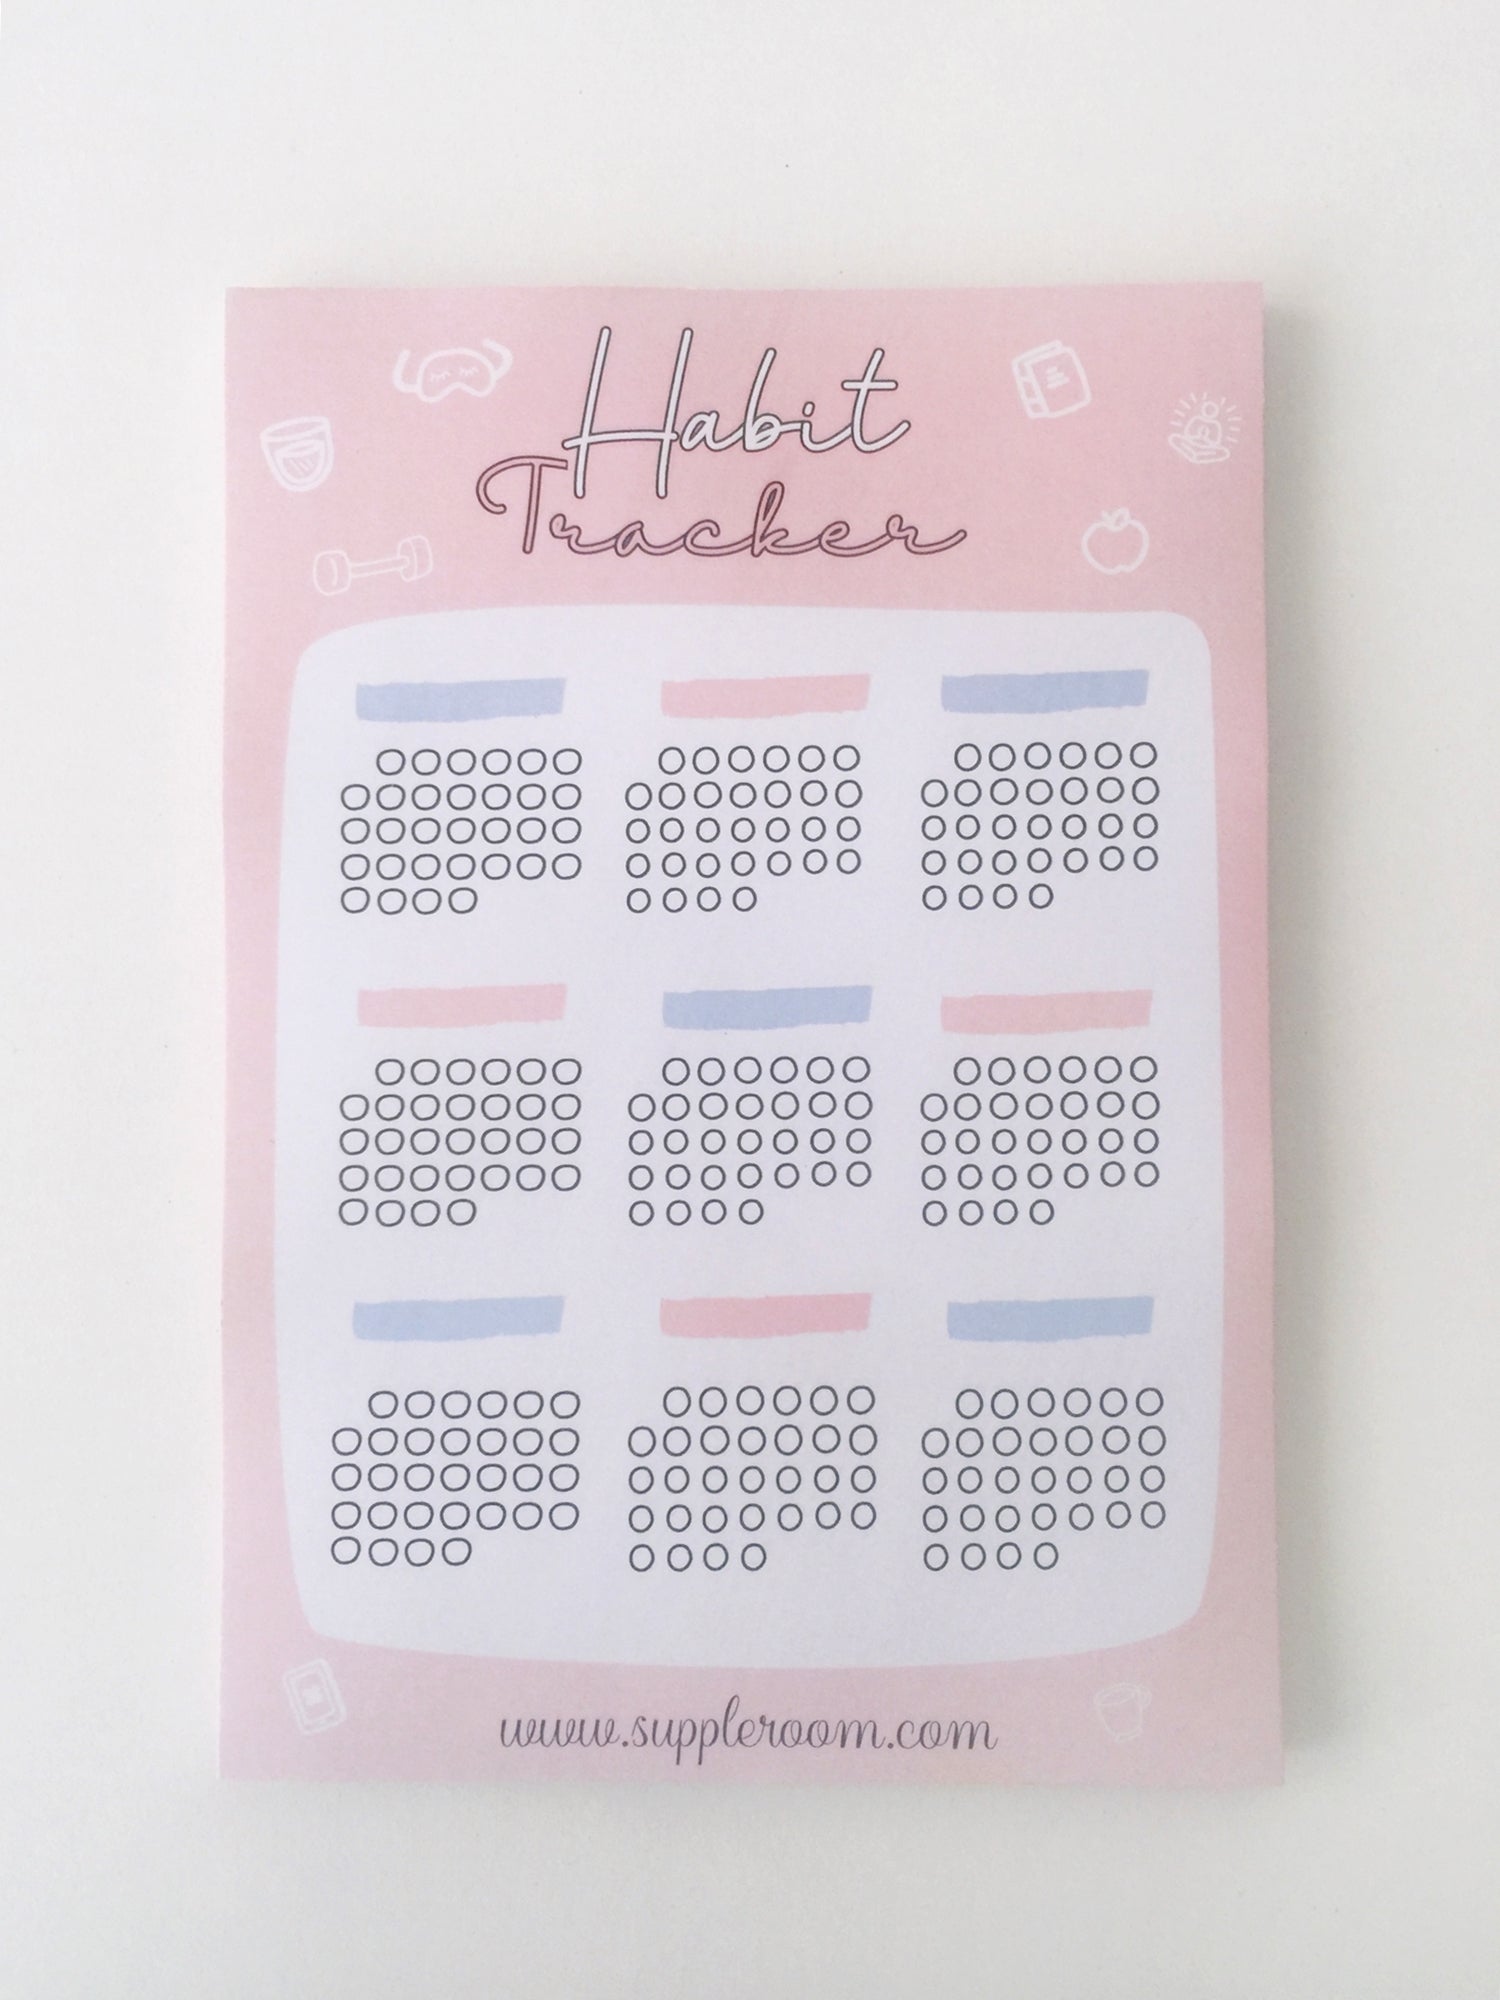 Self Care Habit Tracker | A5 size | 50 sheets - Supple Room